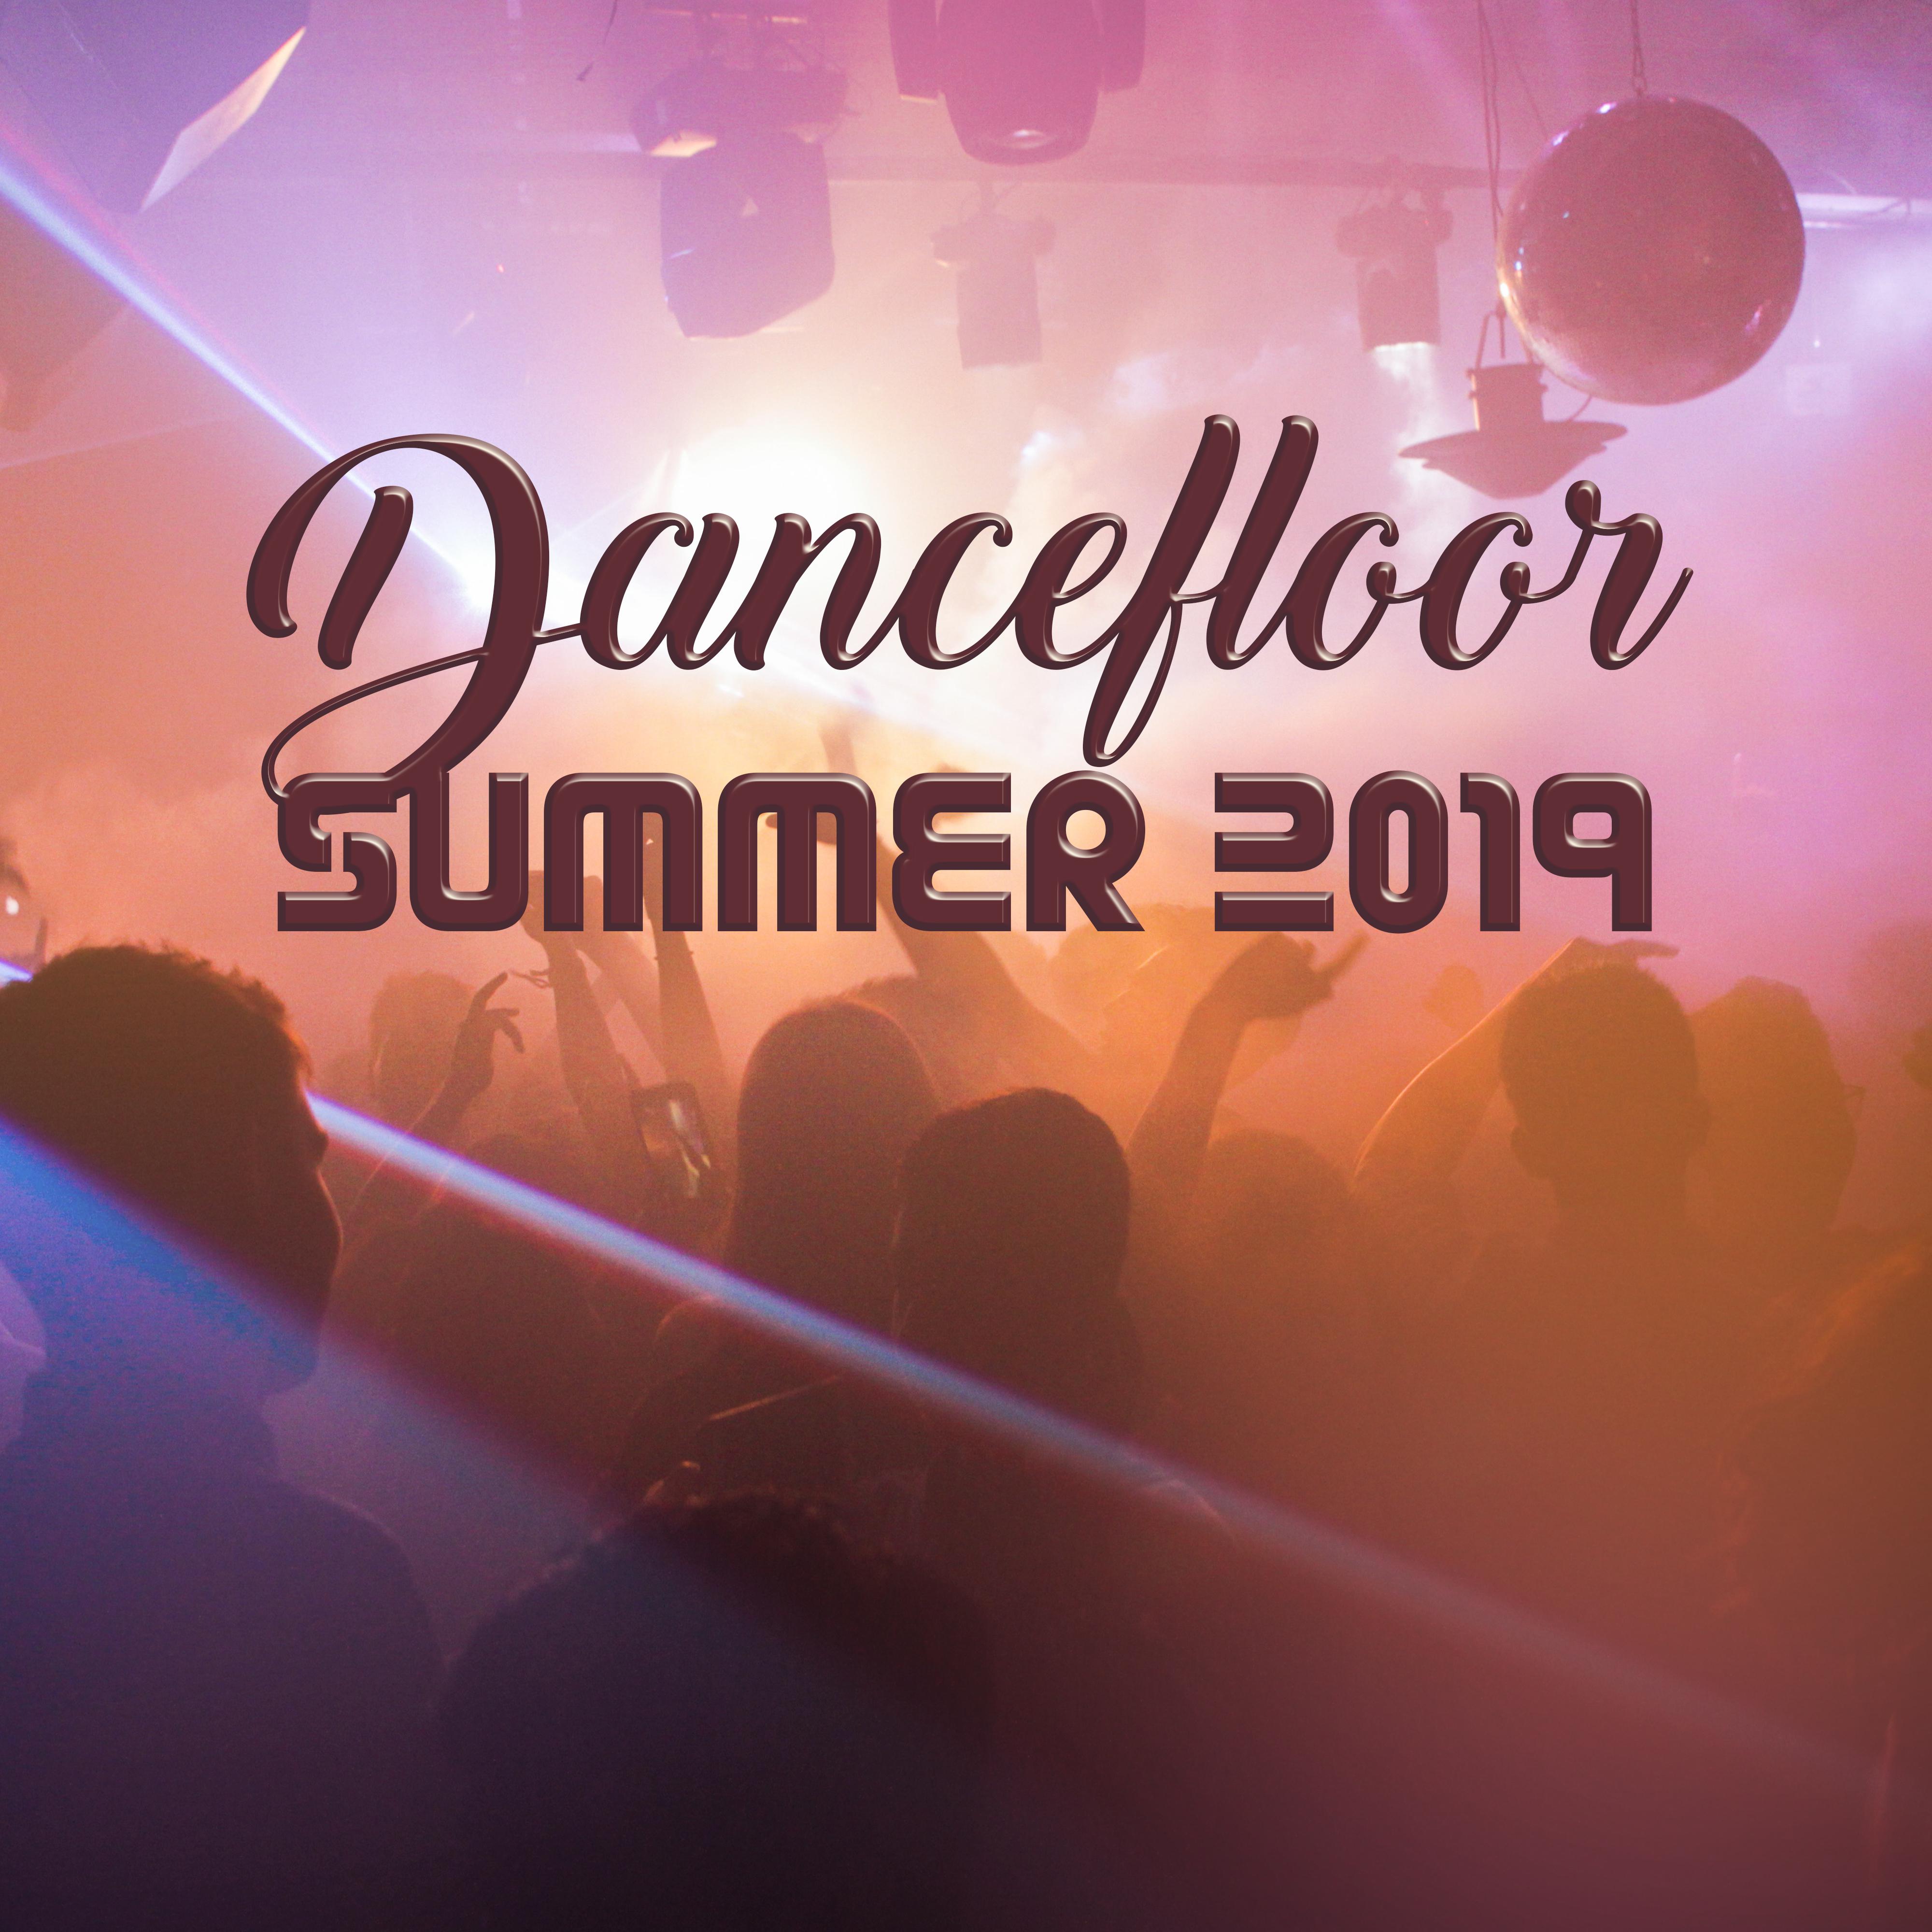 Dancefloor Summer 2019 – Party Hits, Summer 2019, Ibiza Chill Out, Dance Music, **** Rhythms, Ibiza Dance Party, Summer Chill Out 2019